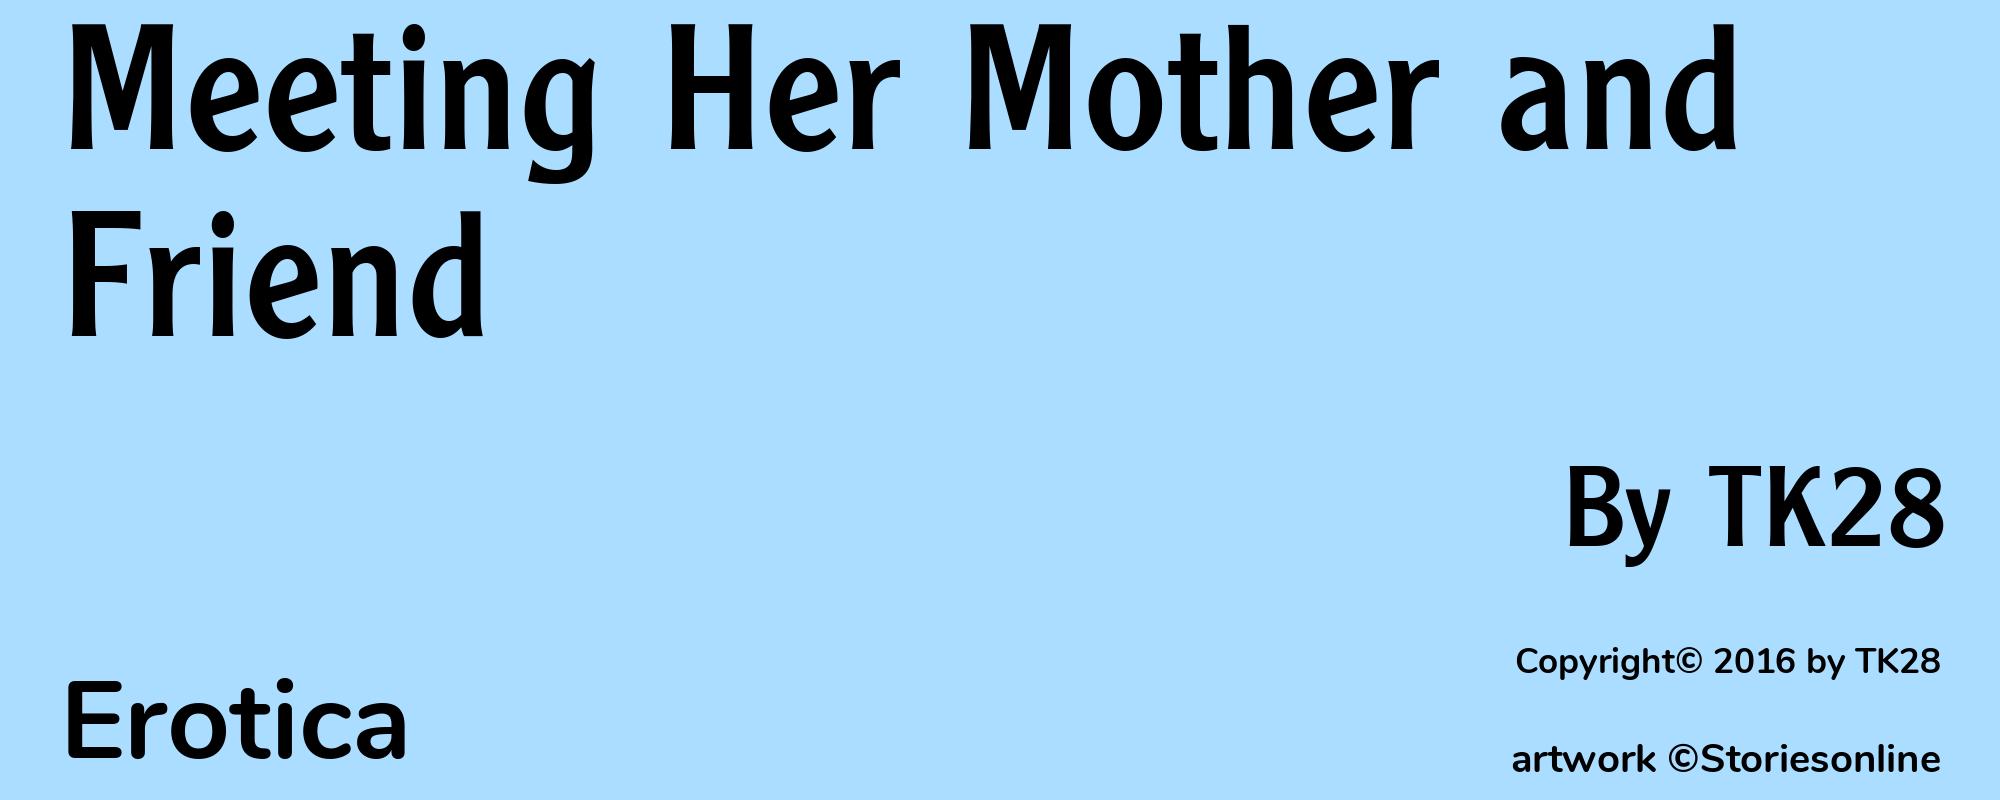 Meeting Her Mother and Friend - Cover